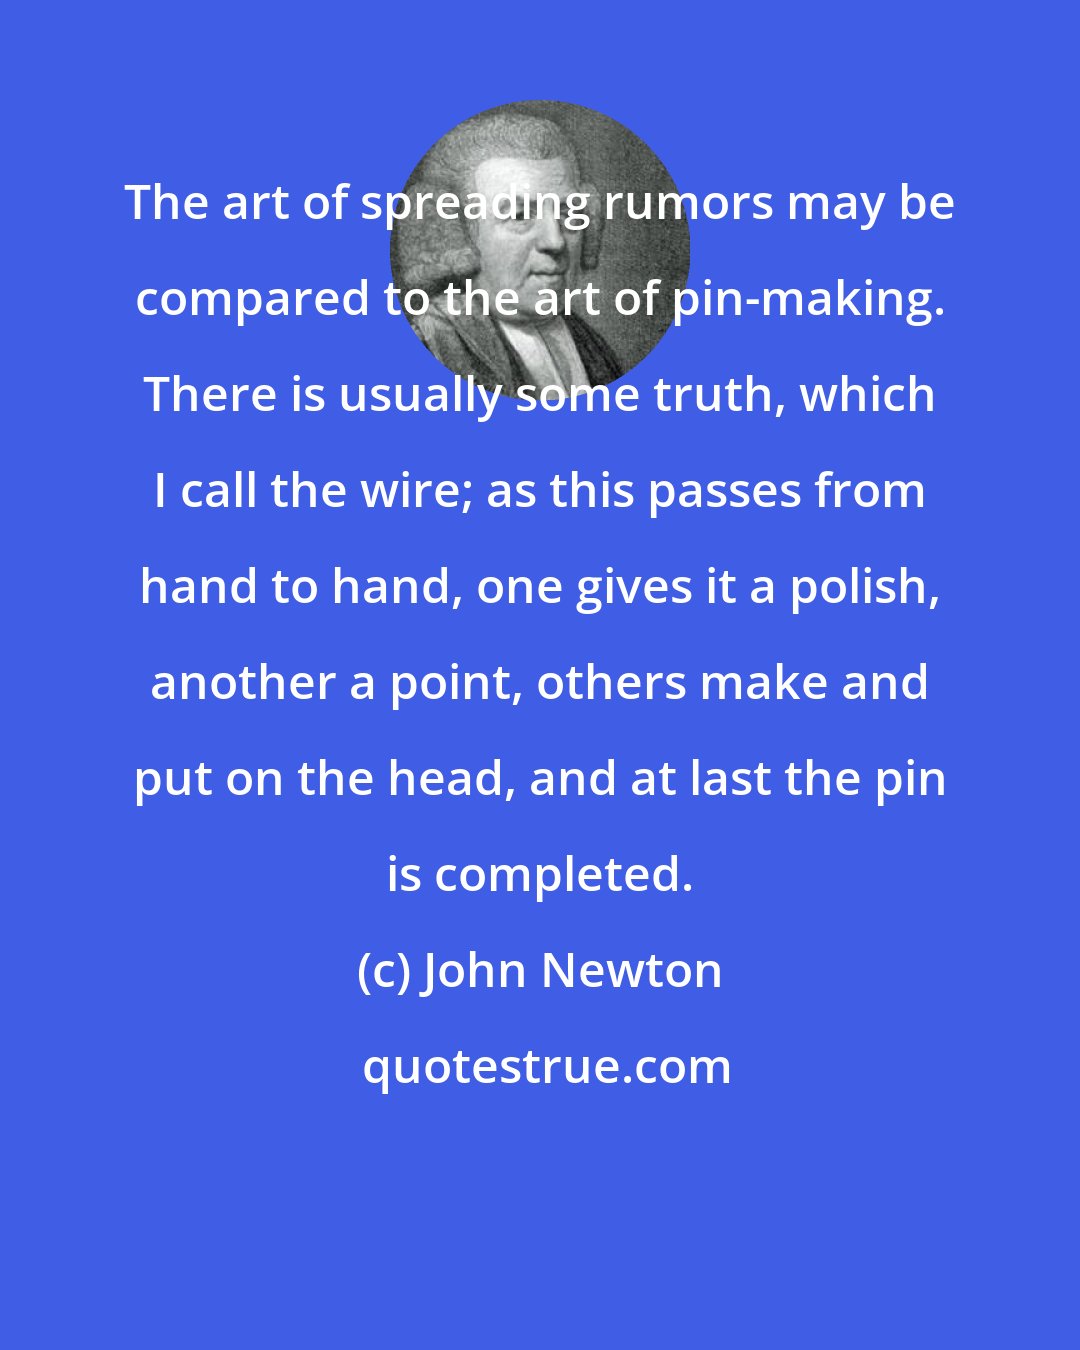 John Newton: The art of spreading rumors may be compared to the art of pin-making. There is usually some truth, which I call the wire; as this passes from hand to hand, one gives it a polish, another a point, others make and put on the head, and at last the pin is completed.